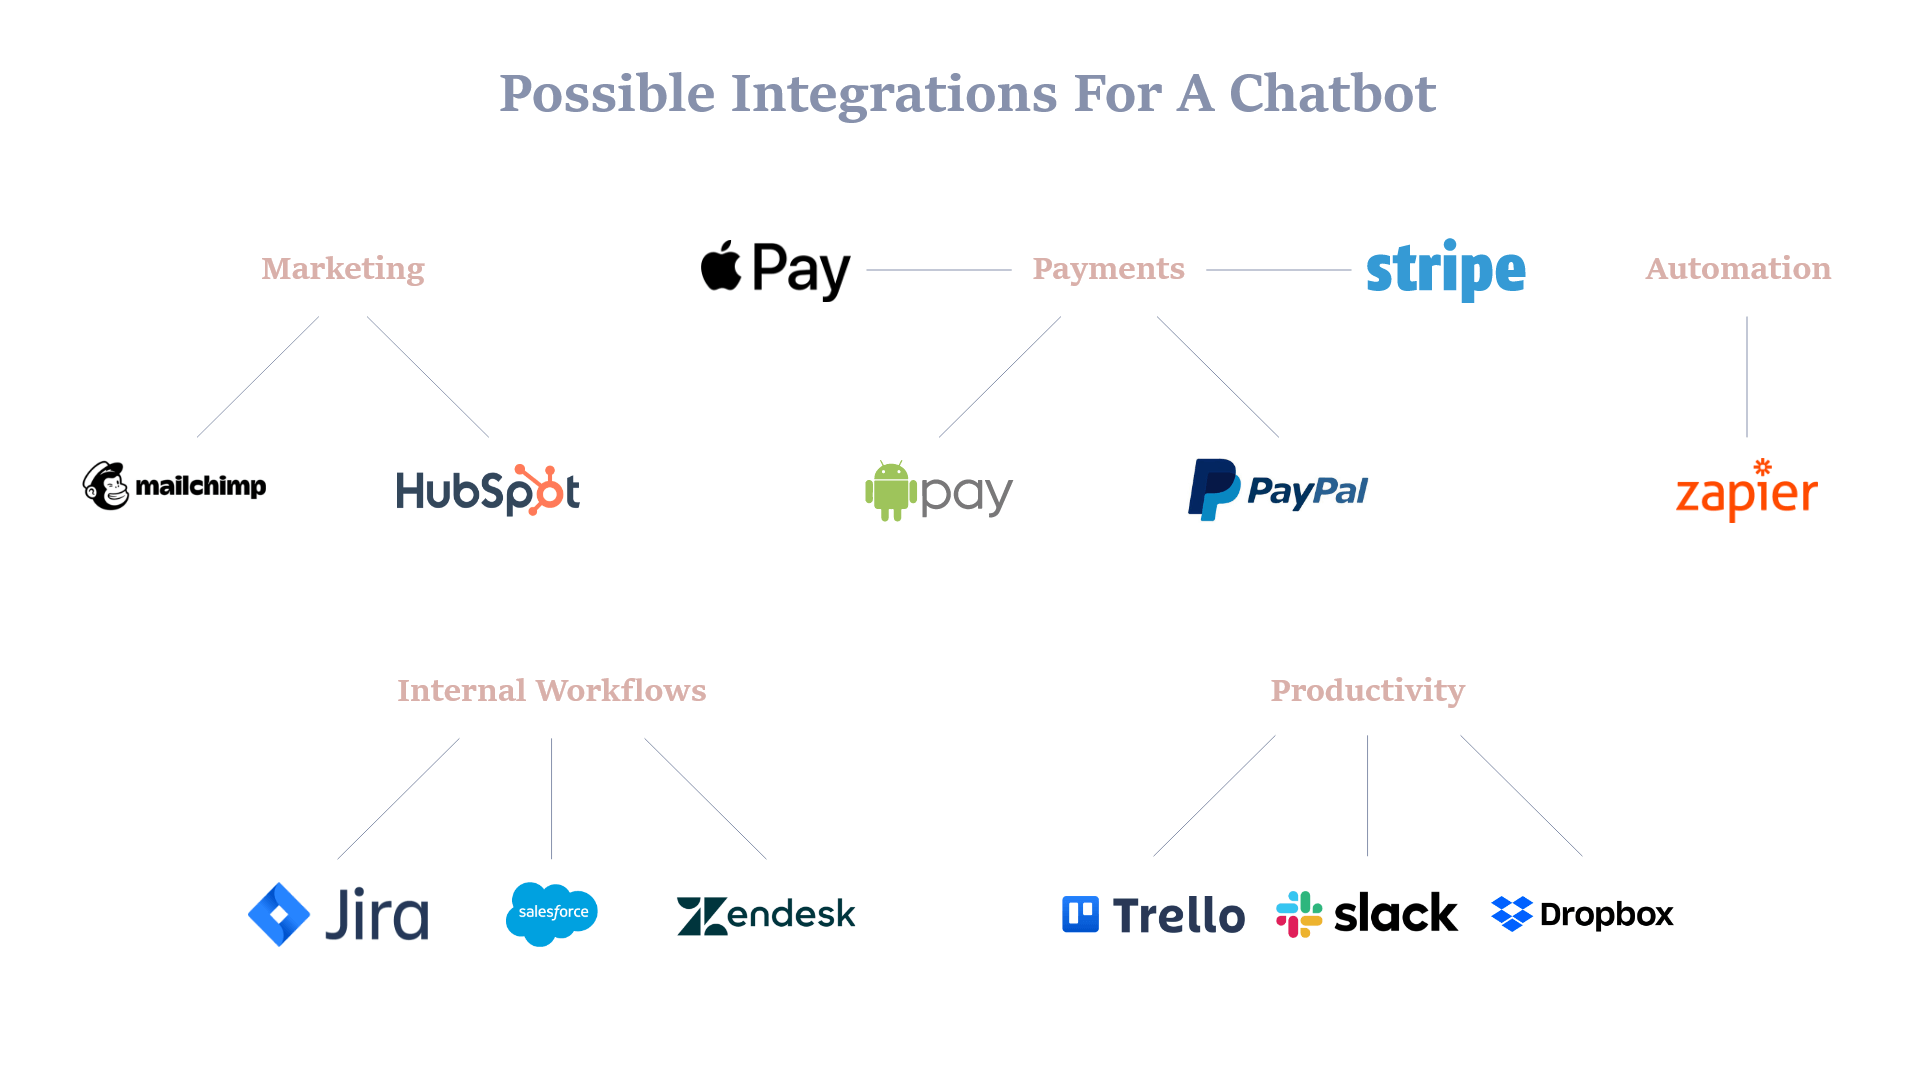 How to Make a Chatbot: Technologies & Business Benefits 7